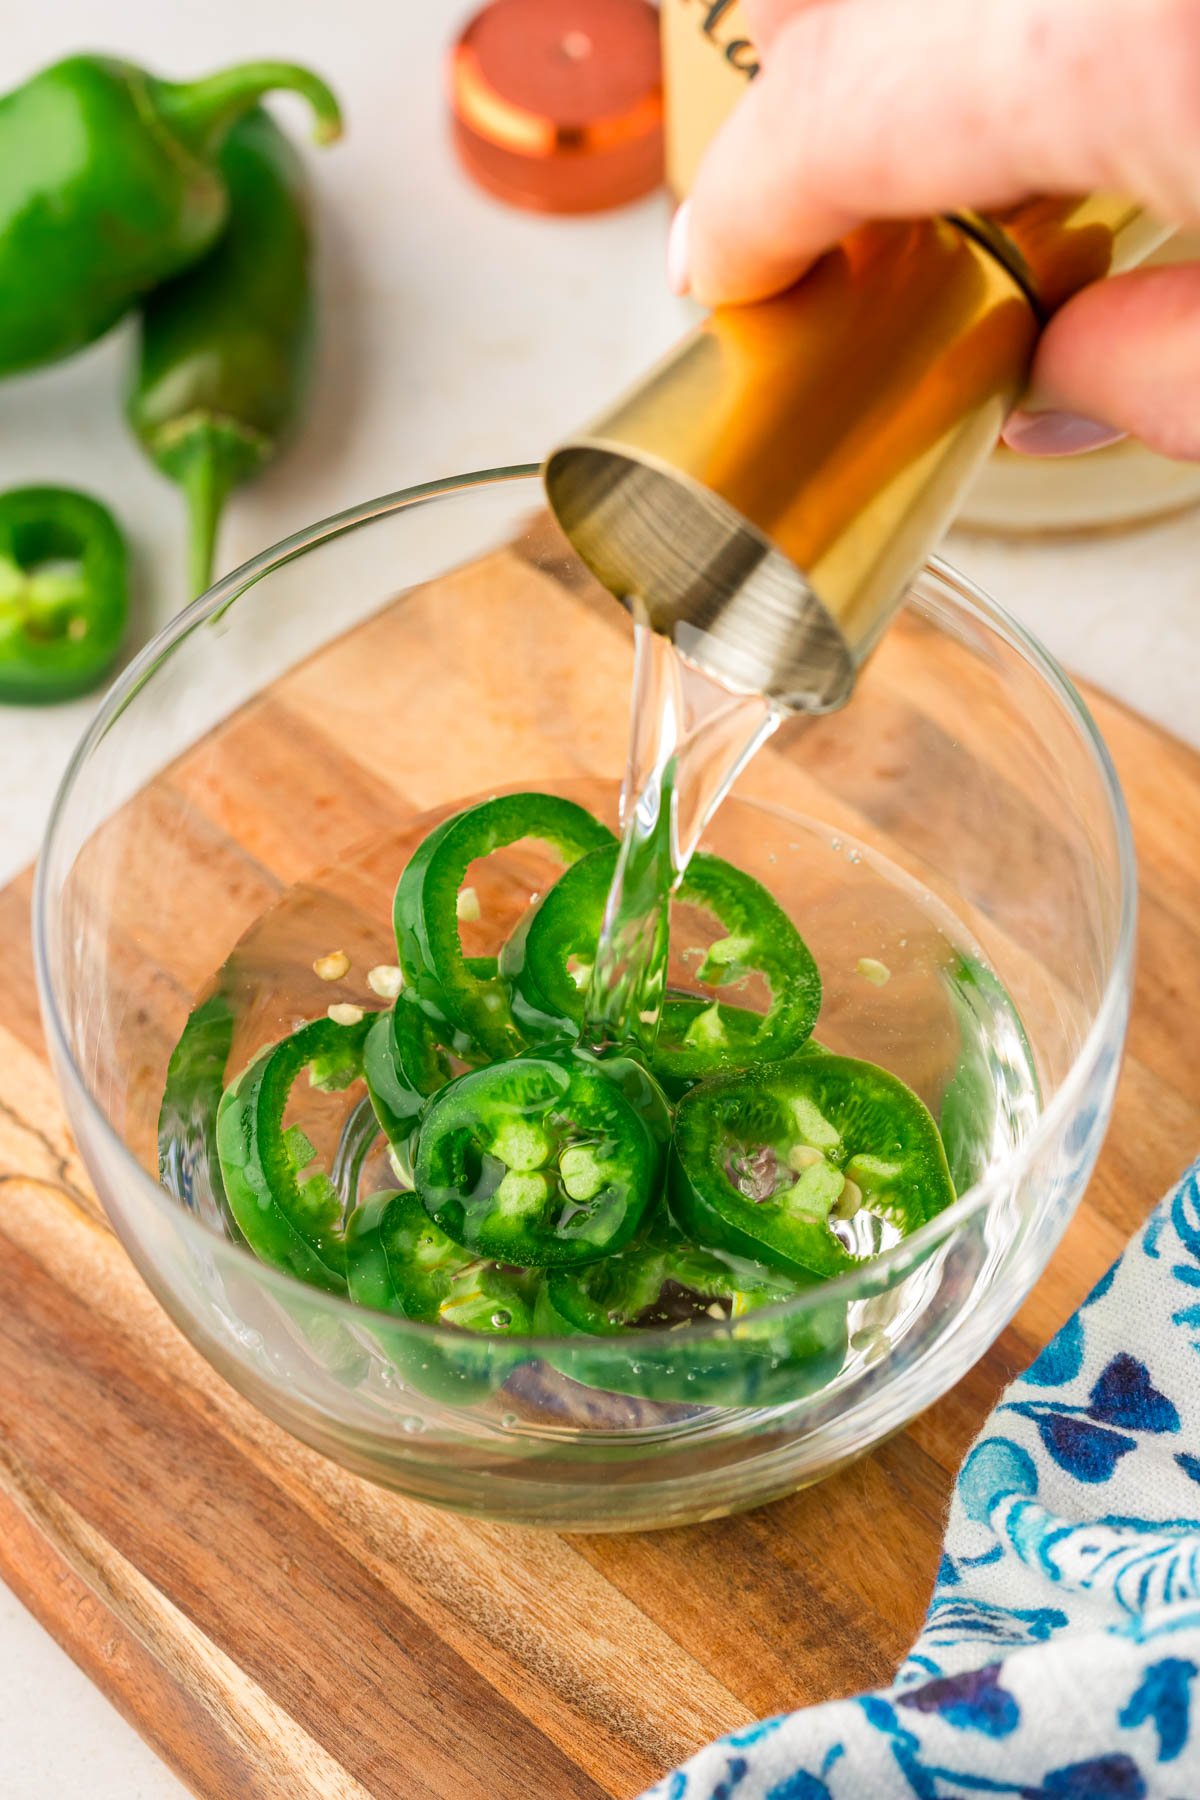 Vodka being poured into a small bowl with sliced jalapenos.